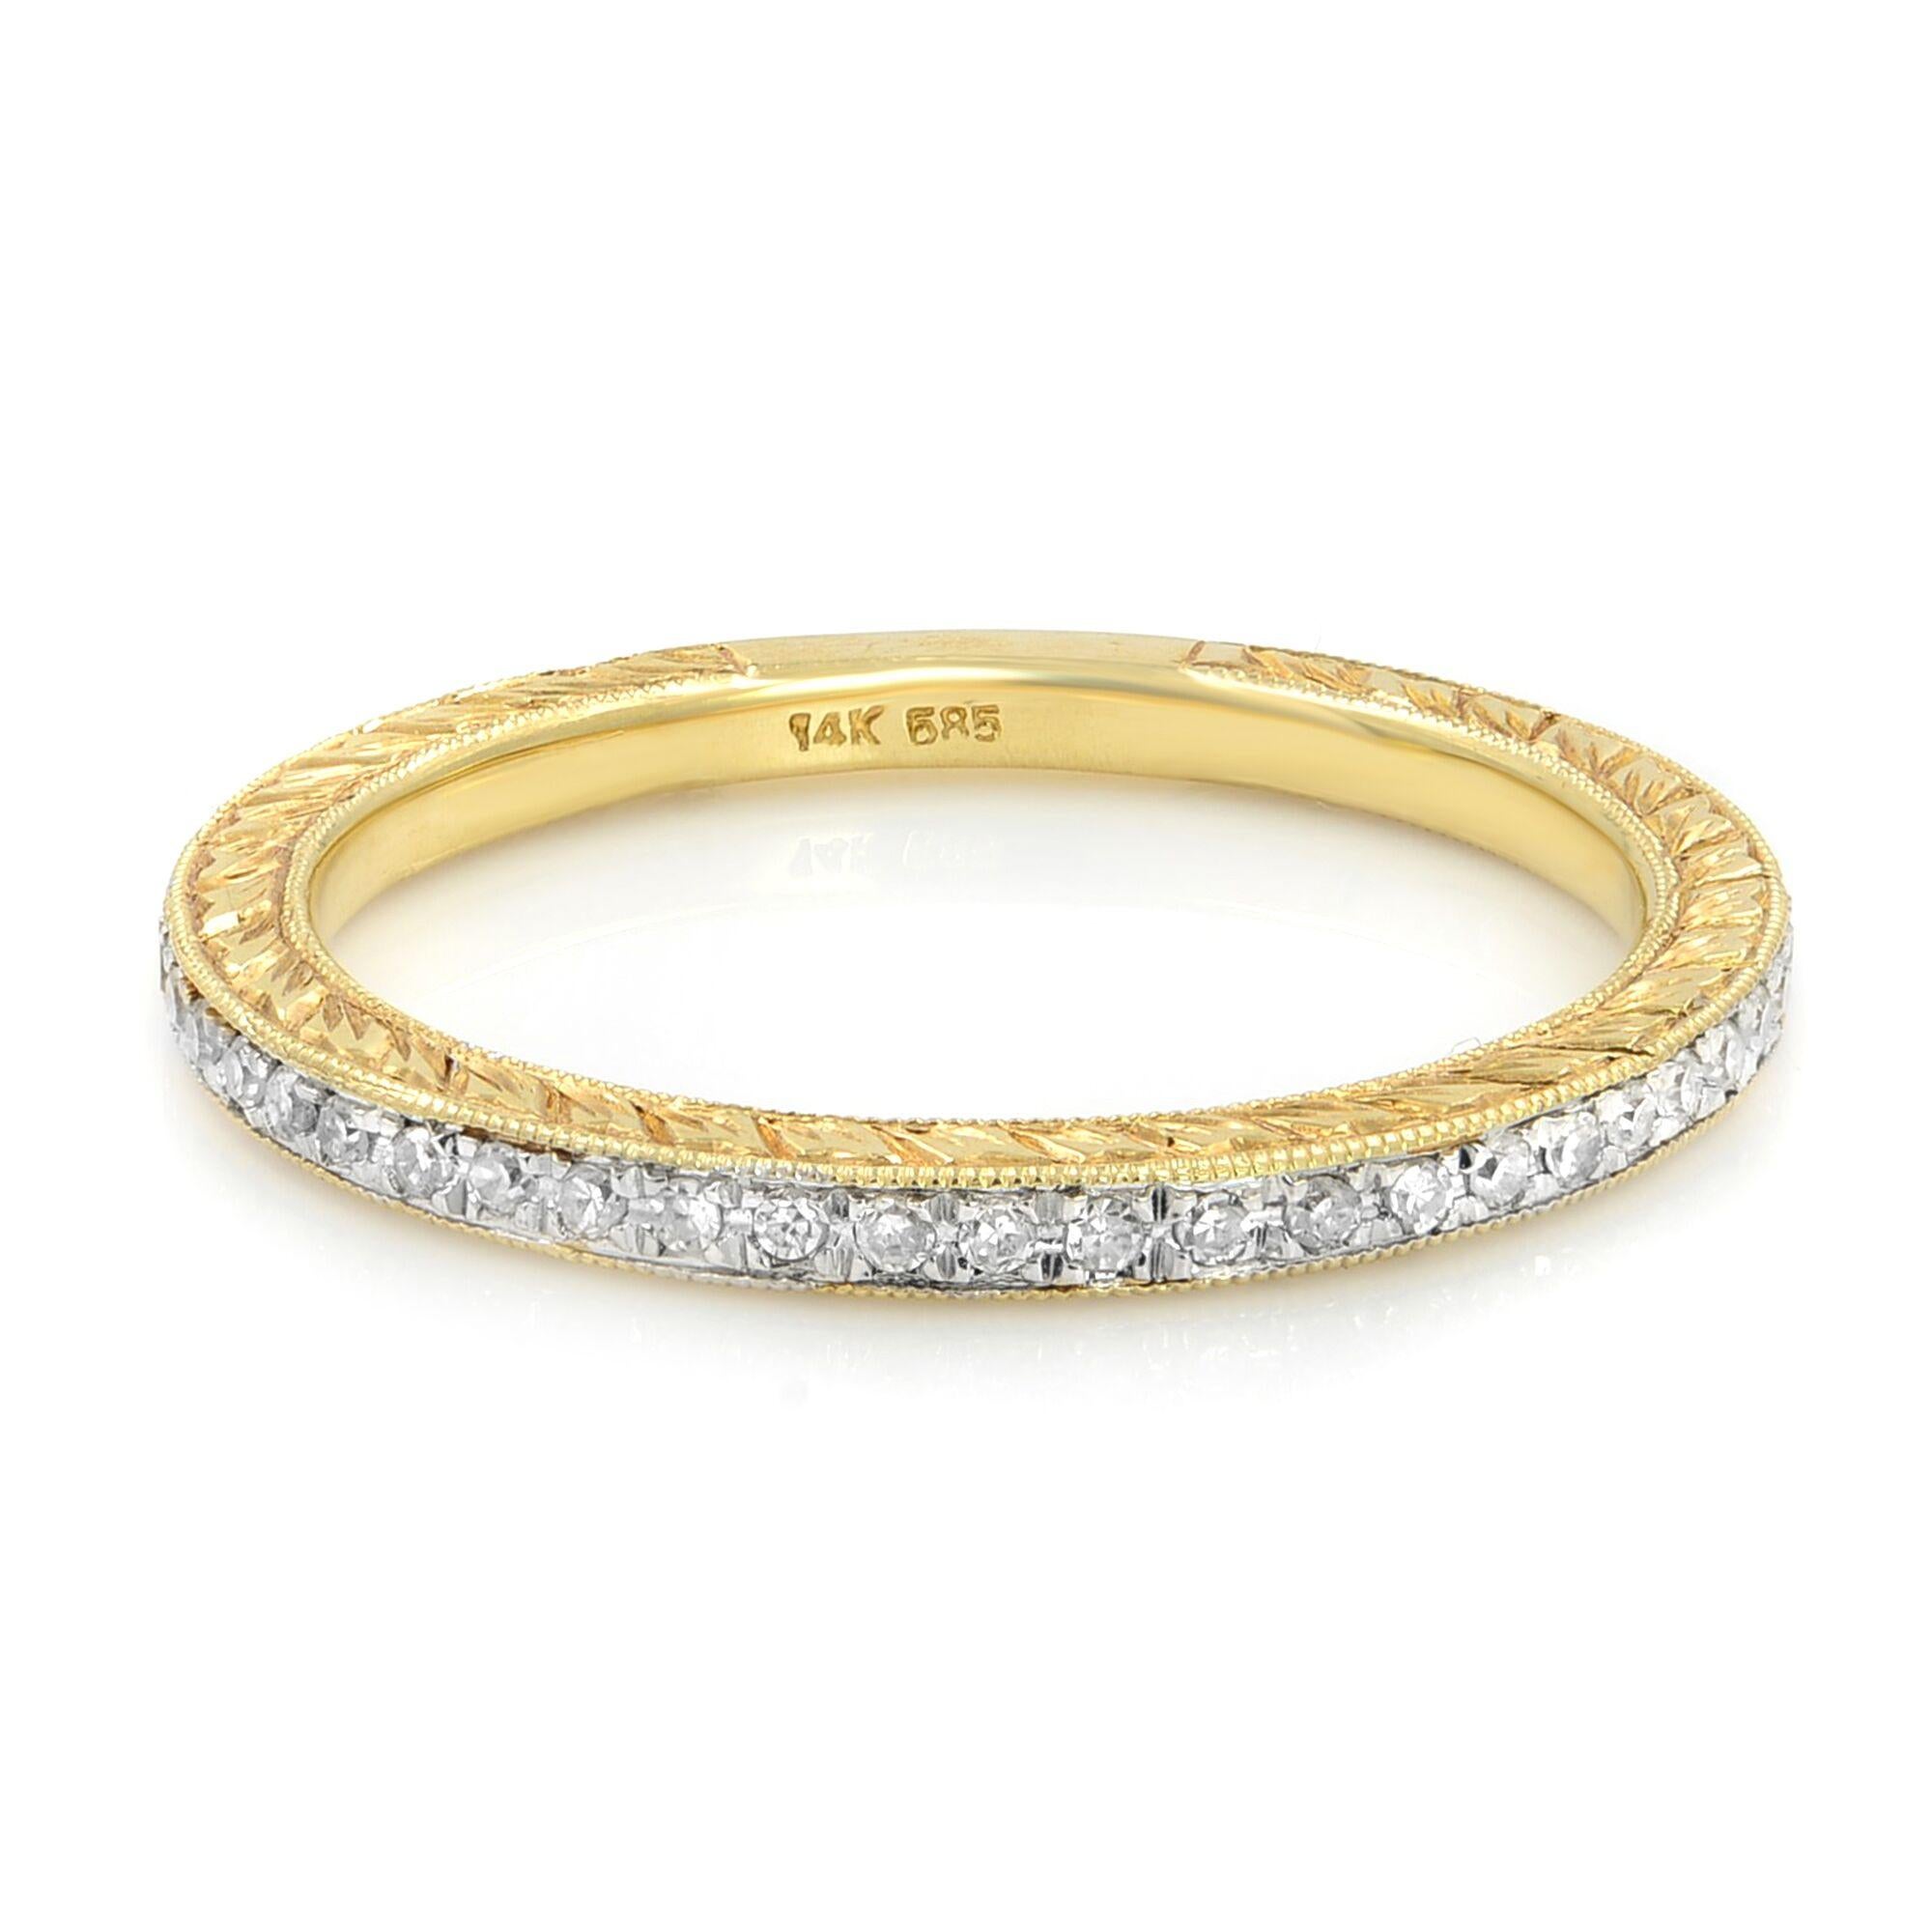 Beautiful dimaond eternity ring crafted in 14k yellow gold with micro pave diamonds encircling almost entire finger. Sizing bar left at the bottom for future sizings. Hand engraved on all high polished sides this band is an amazing find! 0.18cts in